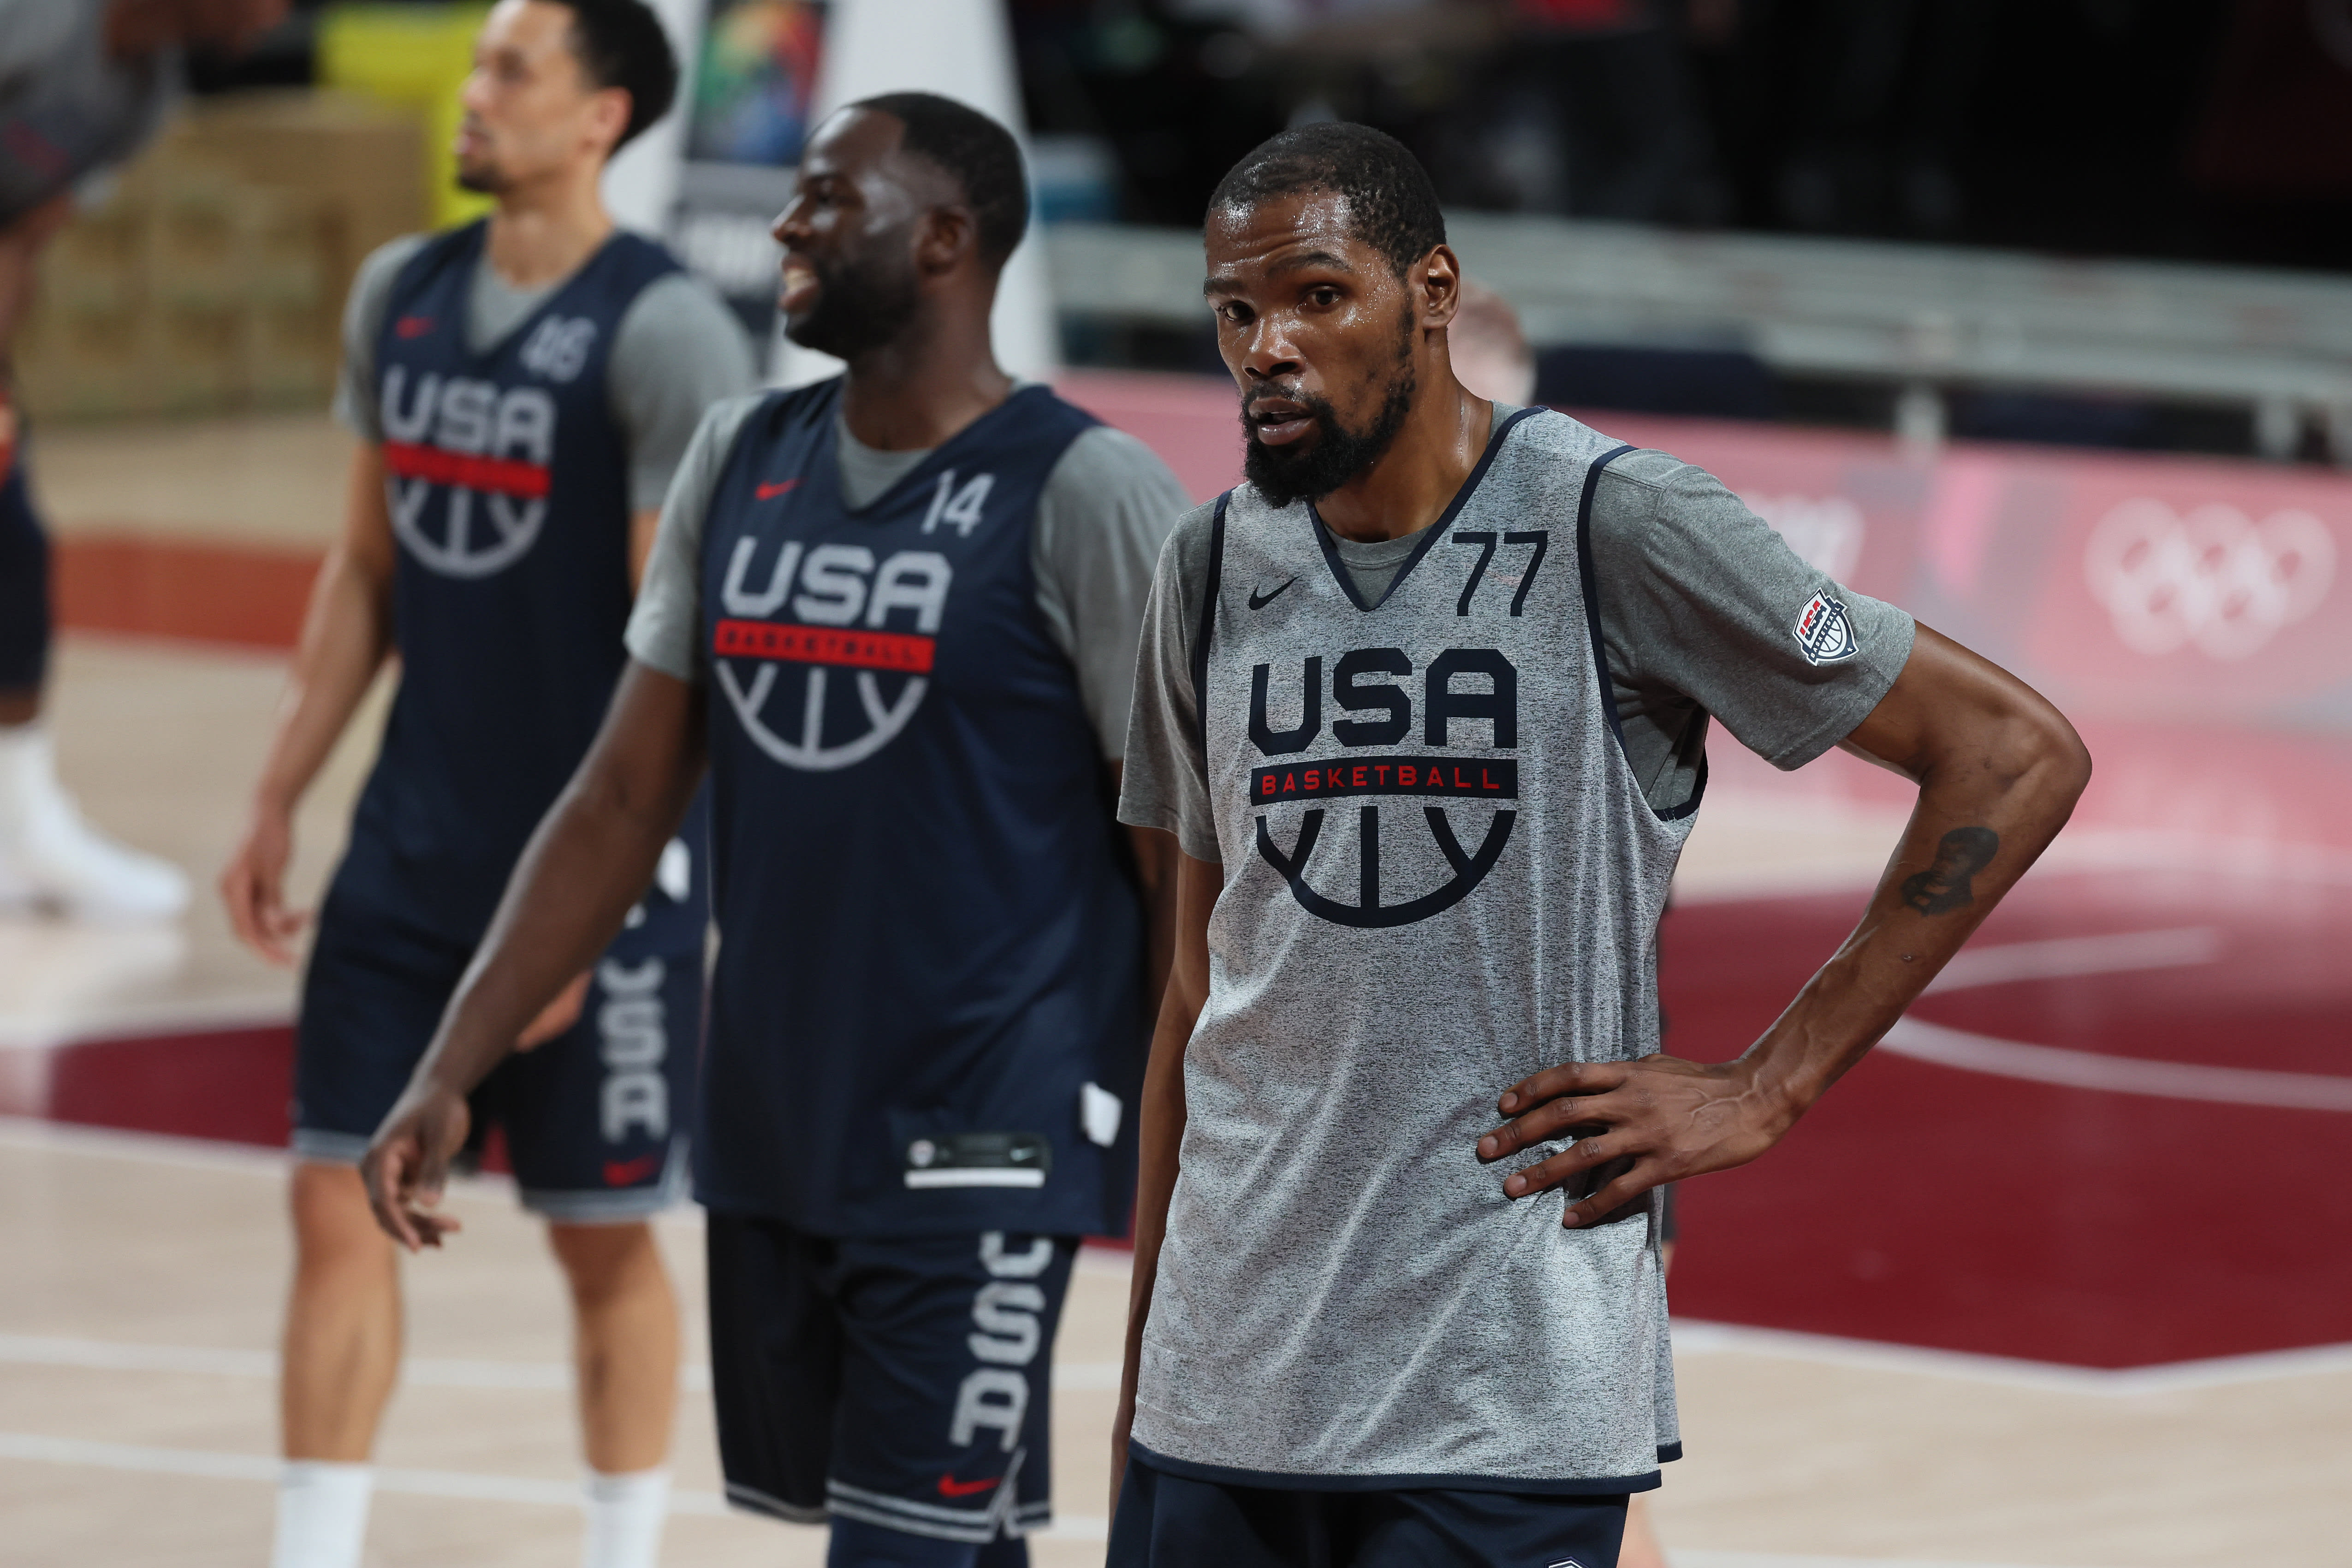 Jrue Holiday is listed as 6'3 229lbs on USAB's website. 24 lbs heavier  than his official NBA weight. KD listed as 225lbs, 15lbs less than his  official NBA weight. : r/nba